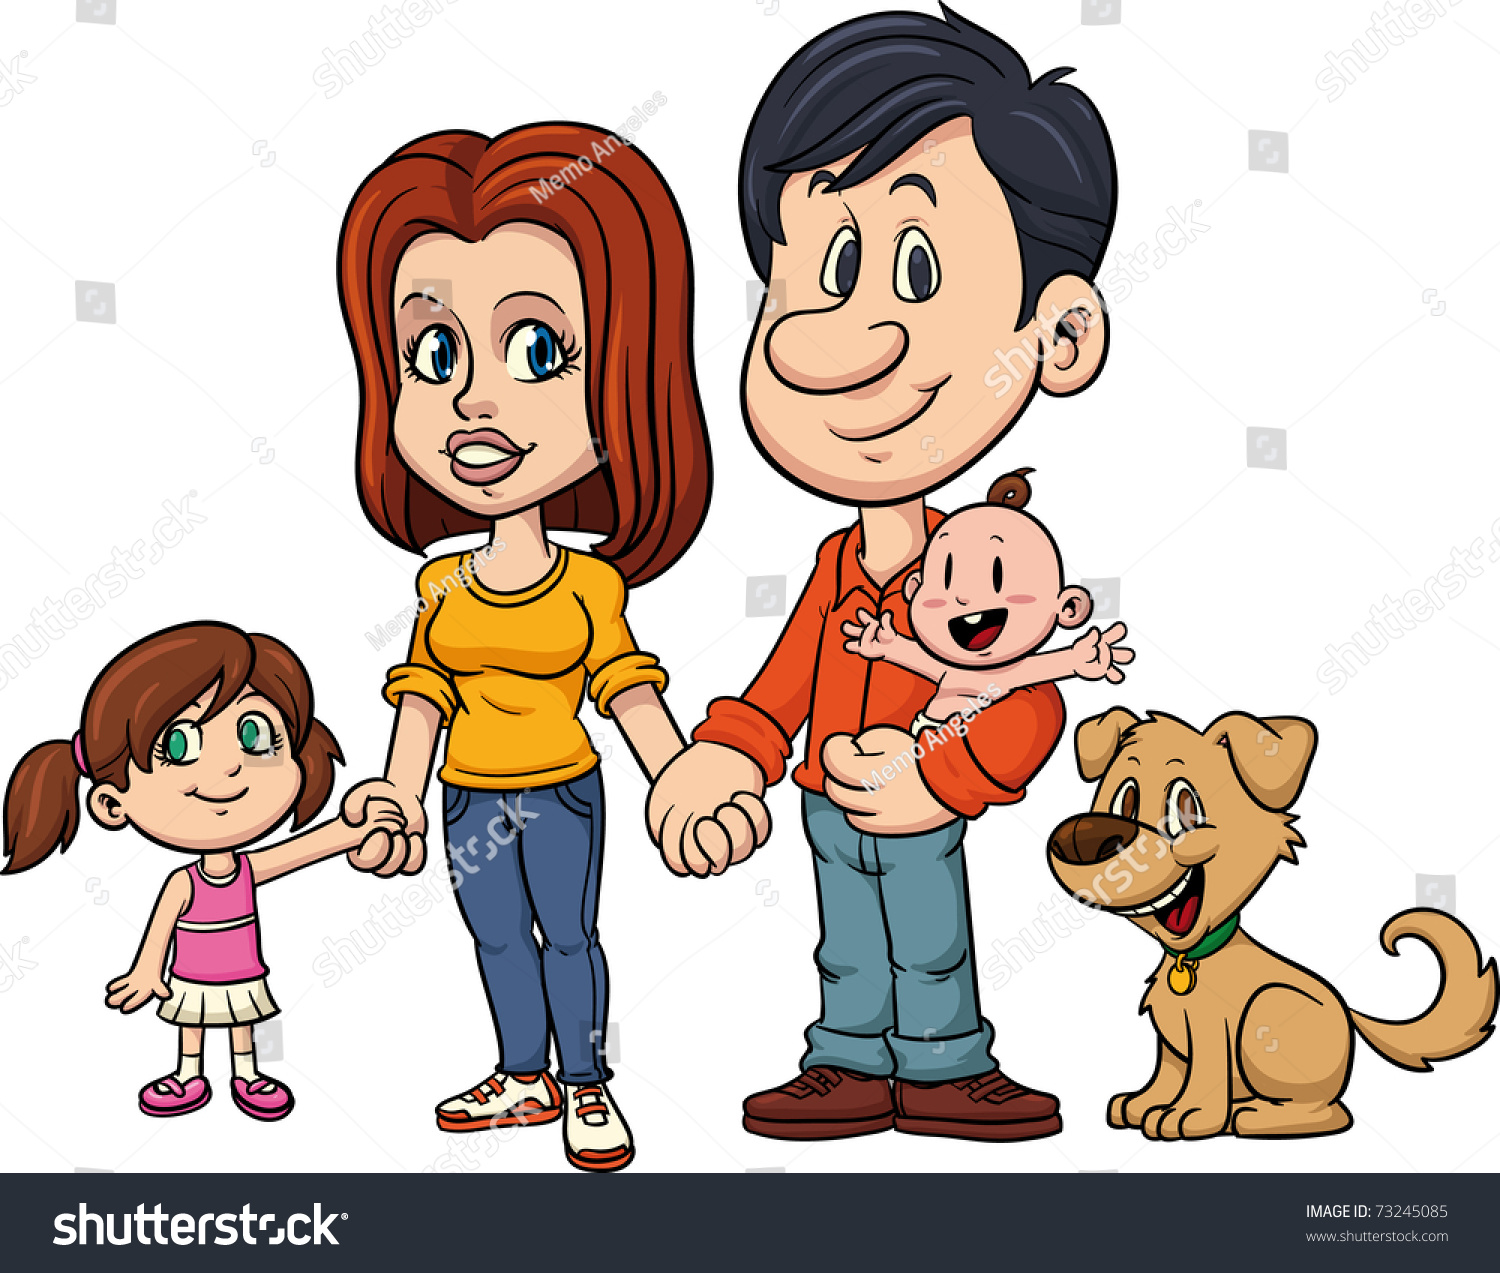 clipart of nuclear family - photo #41